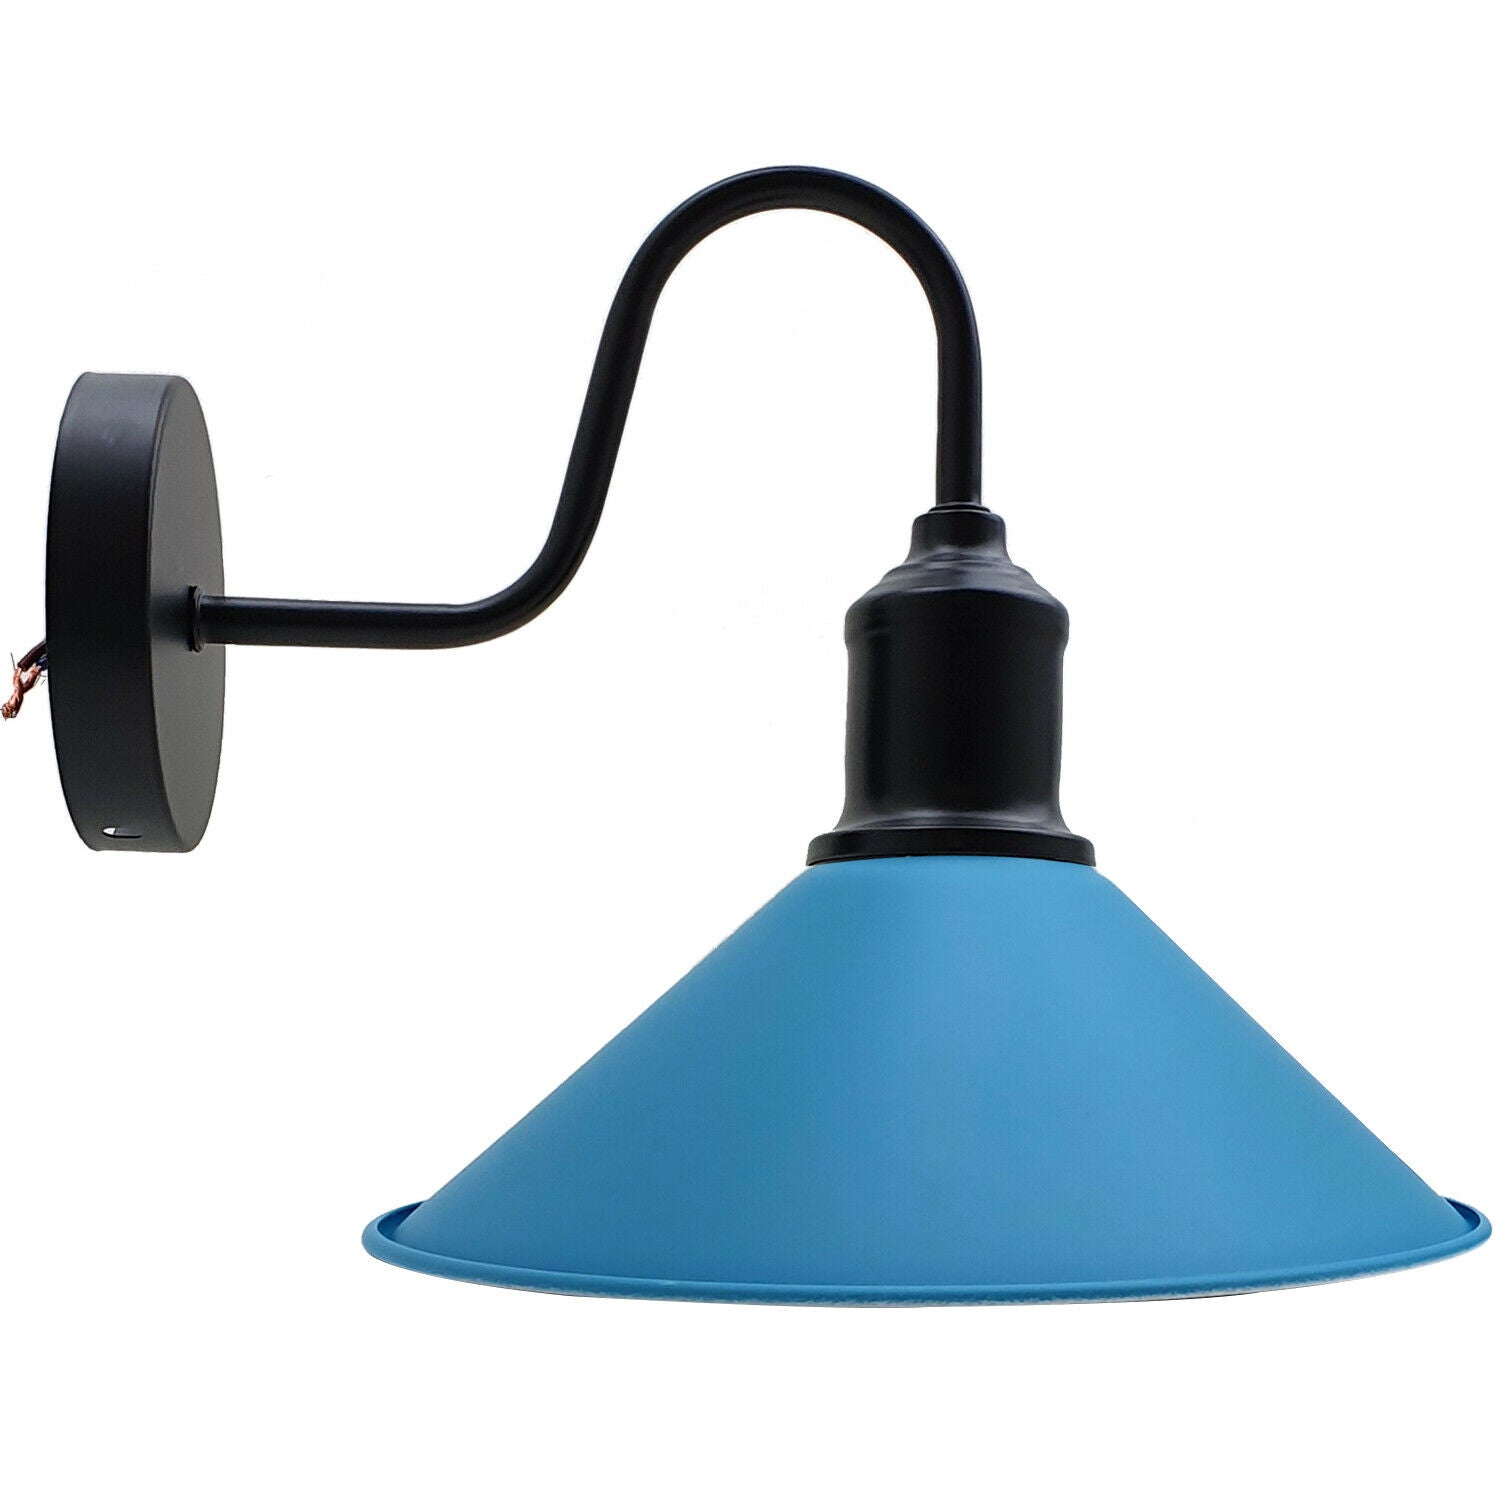 Modern Retro Industrial Blue Color Wall Mounted Lights Rustic Sconce Lamps Fixture~2483 - LEDSone UK Ltd